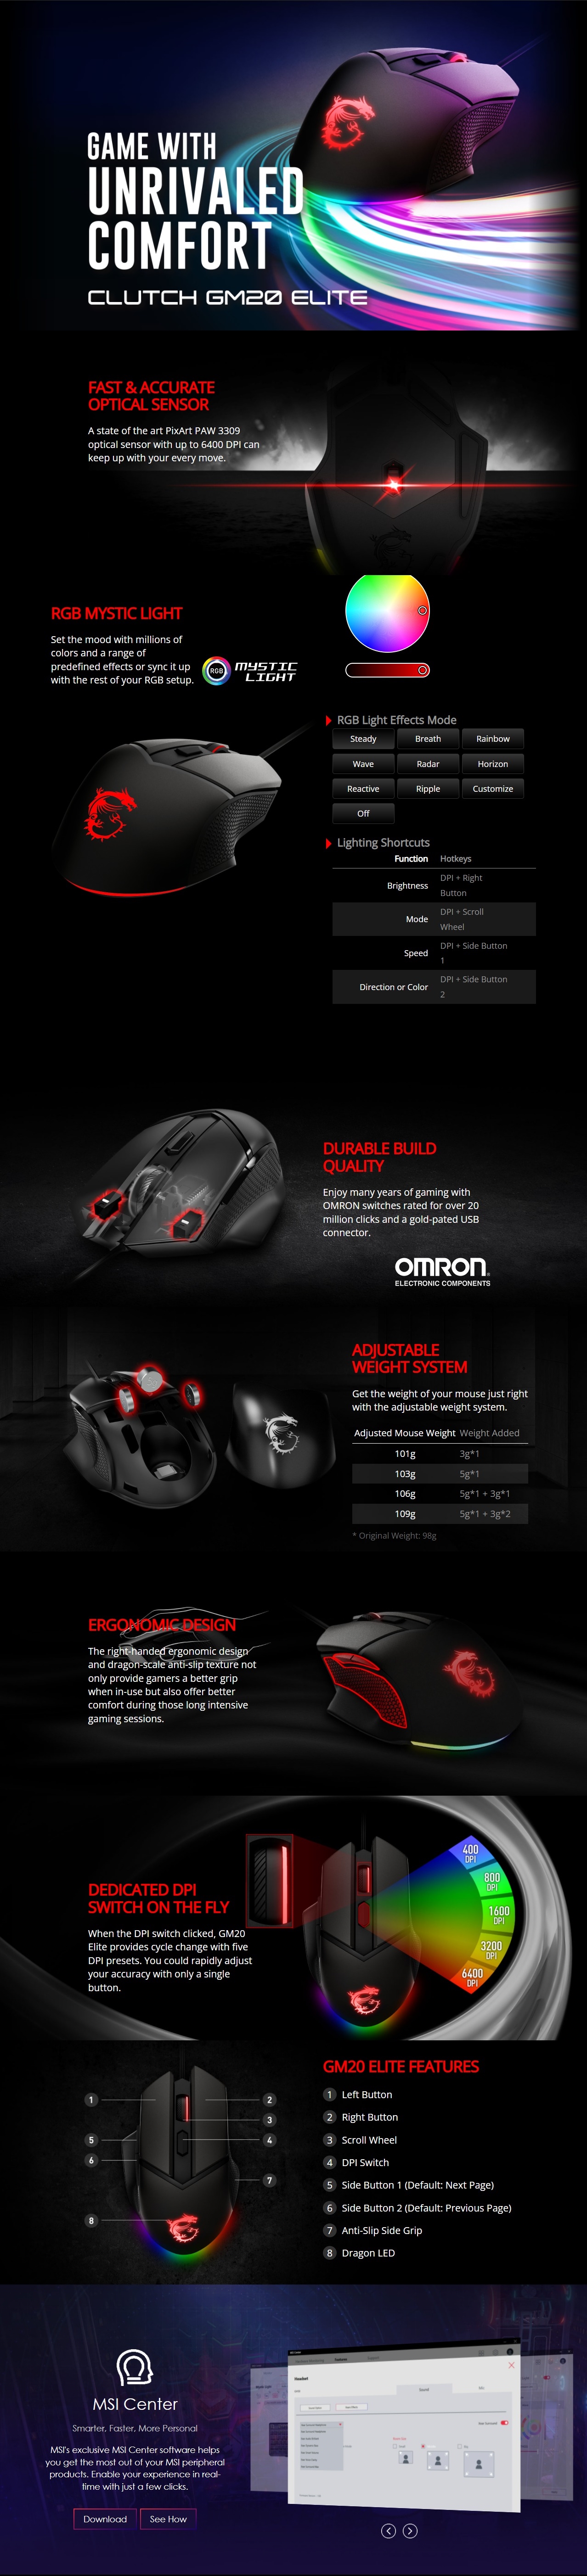 A large marketing image providing additional information about the product MSI Clutch GM20 Elite Gaming Mouse - Additional alt info not provided